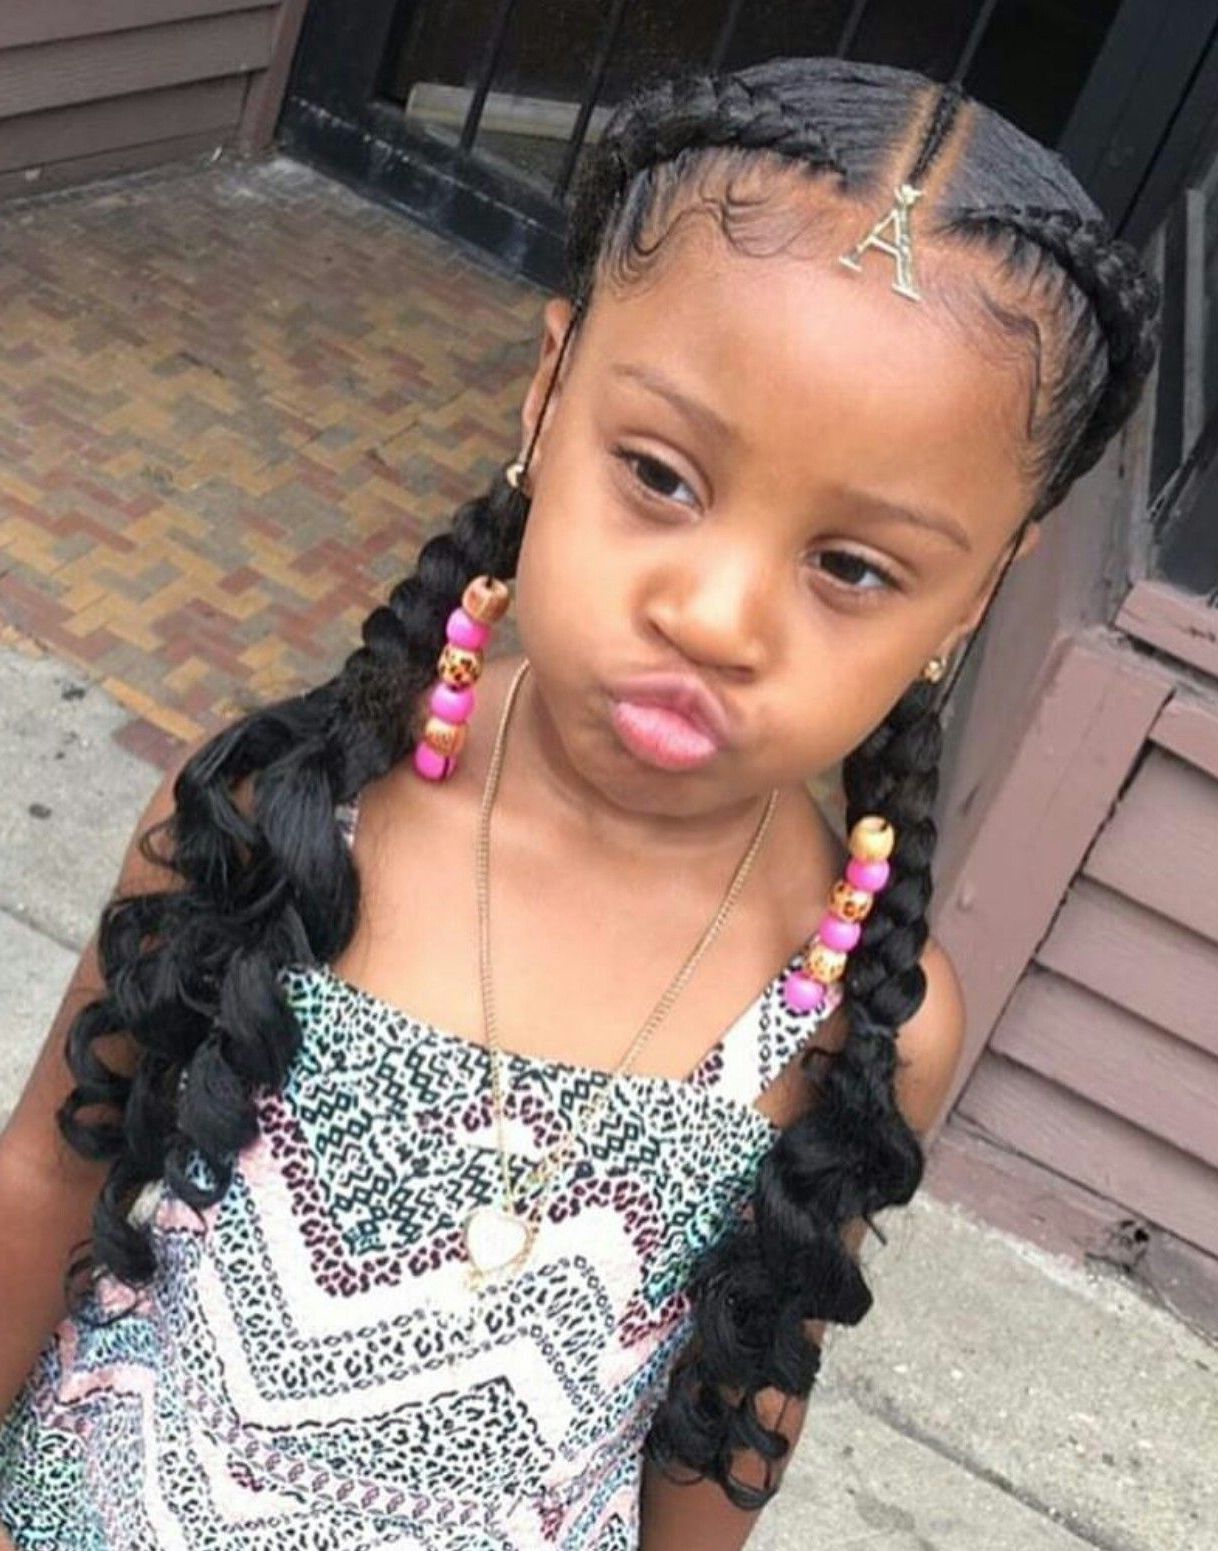 Find Out Full Gallery Of New Black Baby Hairstyles For Short Hair With Regard To Black Baby Hairstyles For Short Hair (View 13 of 25)